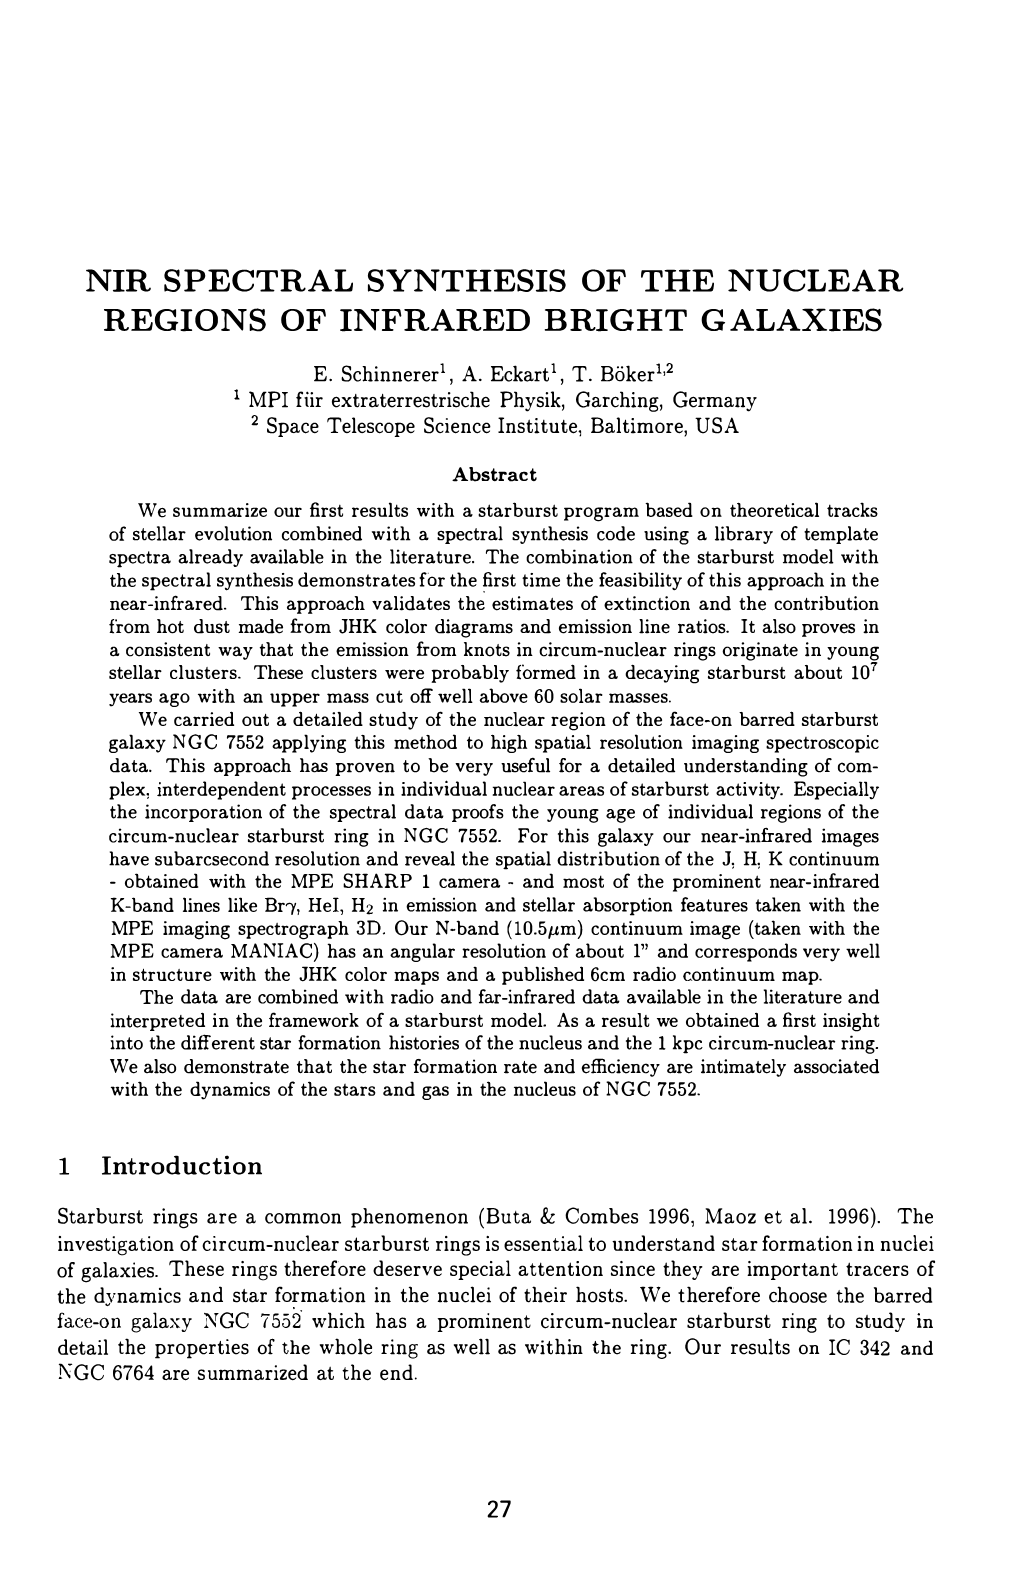 Nir Spectral Synthesis of the Nuclear Regions of Infrared Bright Galaxies